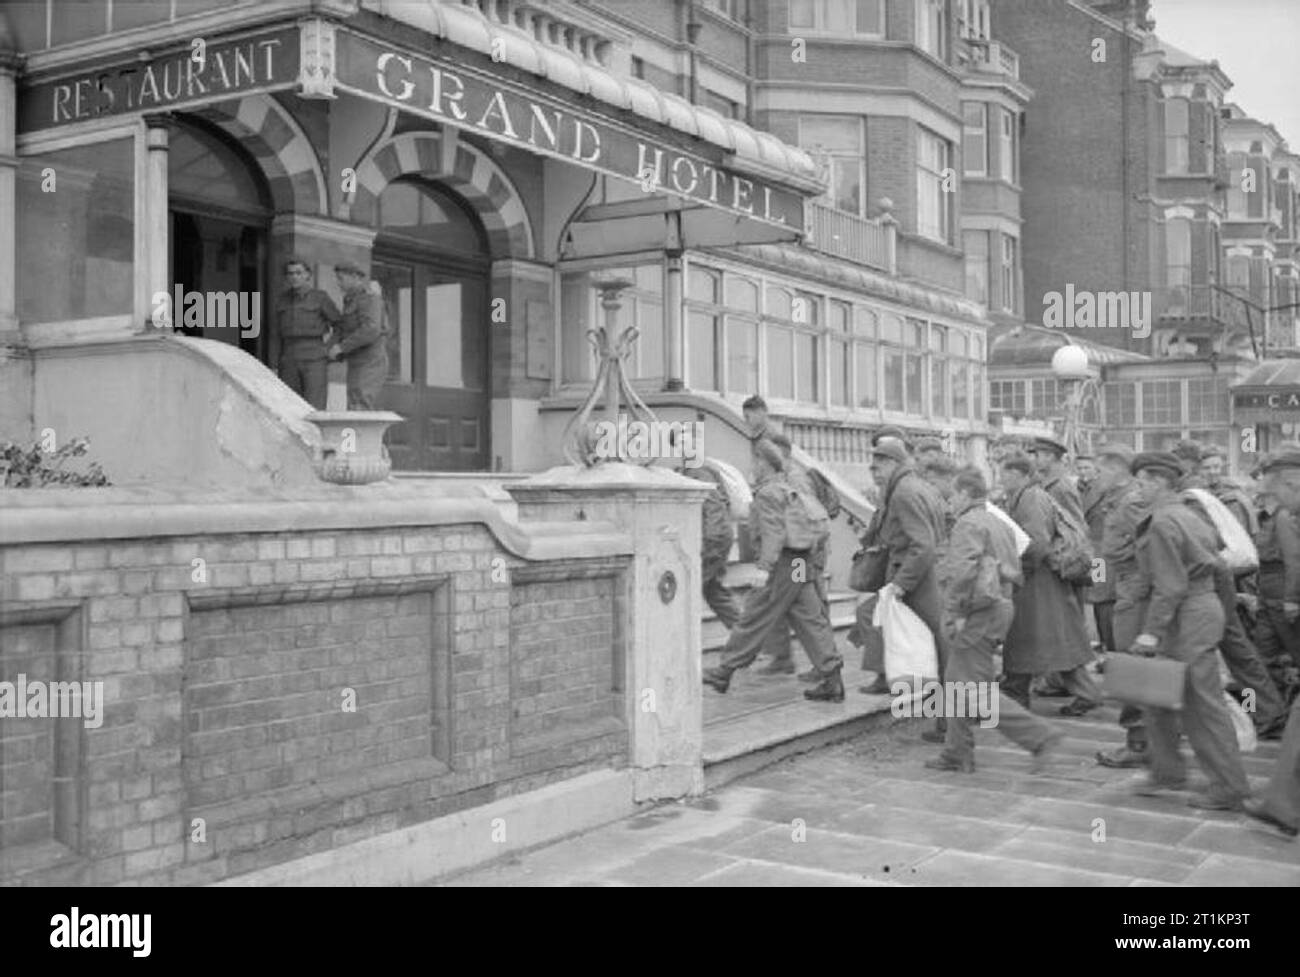 New Zealand Repatriates Arrive in England- Everyday Life For Repatriated Pows in Margate, Kent, England, UK, April 1945 A large group of New Zealand ex-Prisoners of War climb the steps to the grand entrance of the Grand Hotel, Westcliff, Margate, which is being used as a reception centre. They are all carrying kitbags or haversacks. Stock Photo